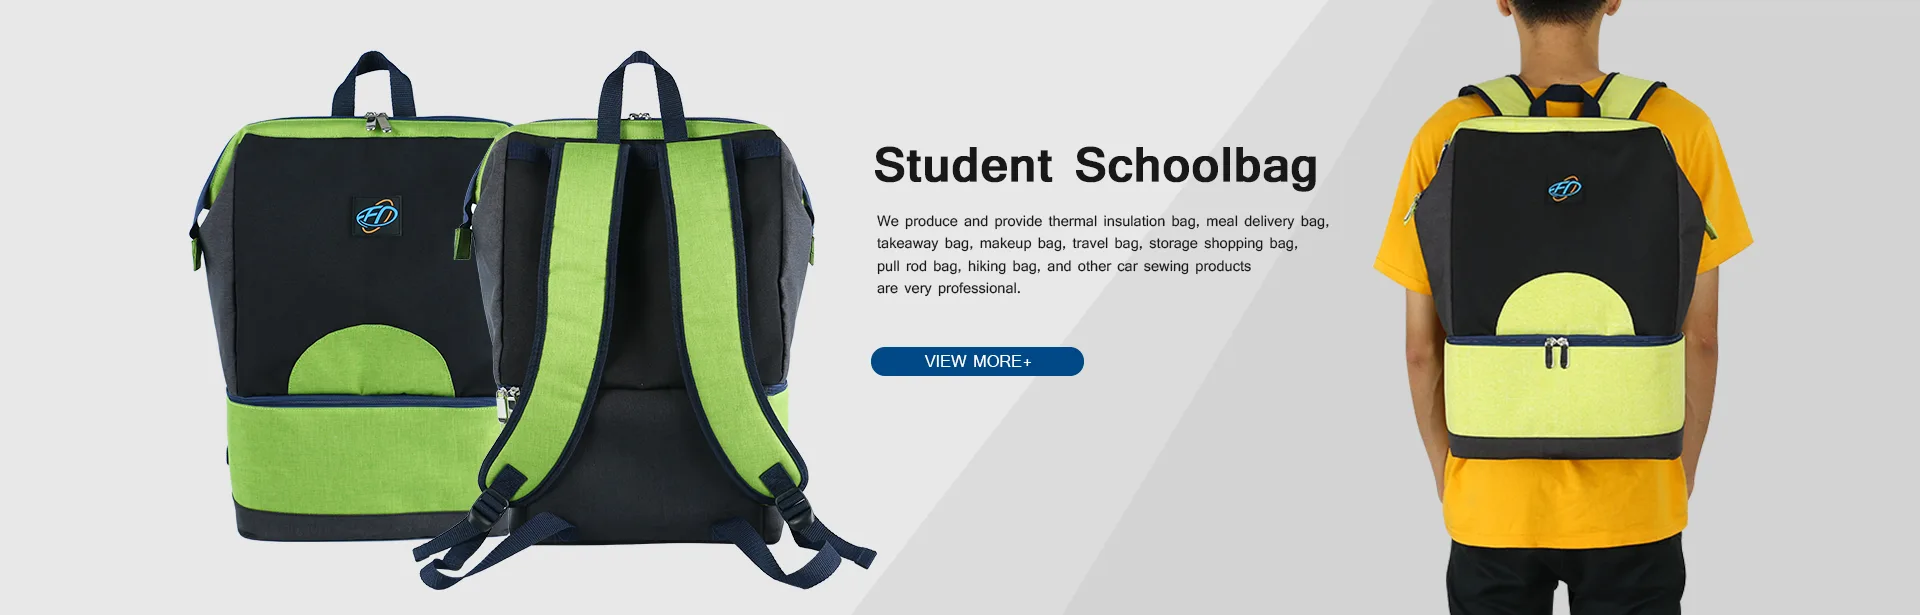 China Student Schoolbag Factory at Supplier